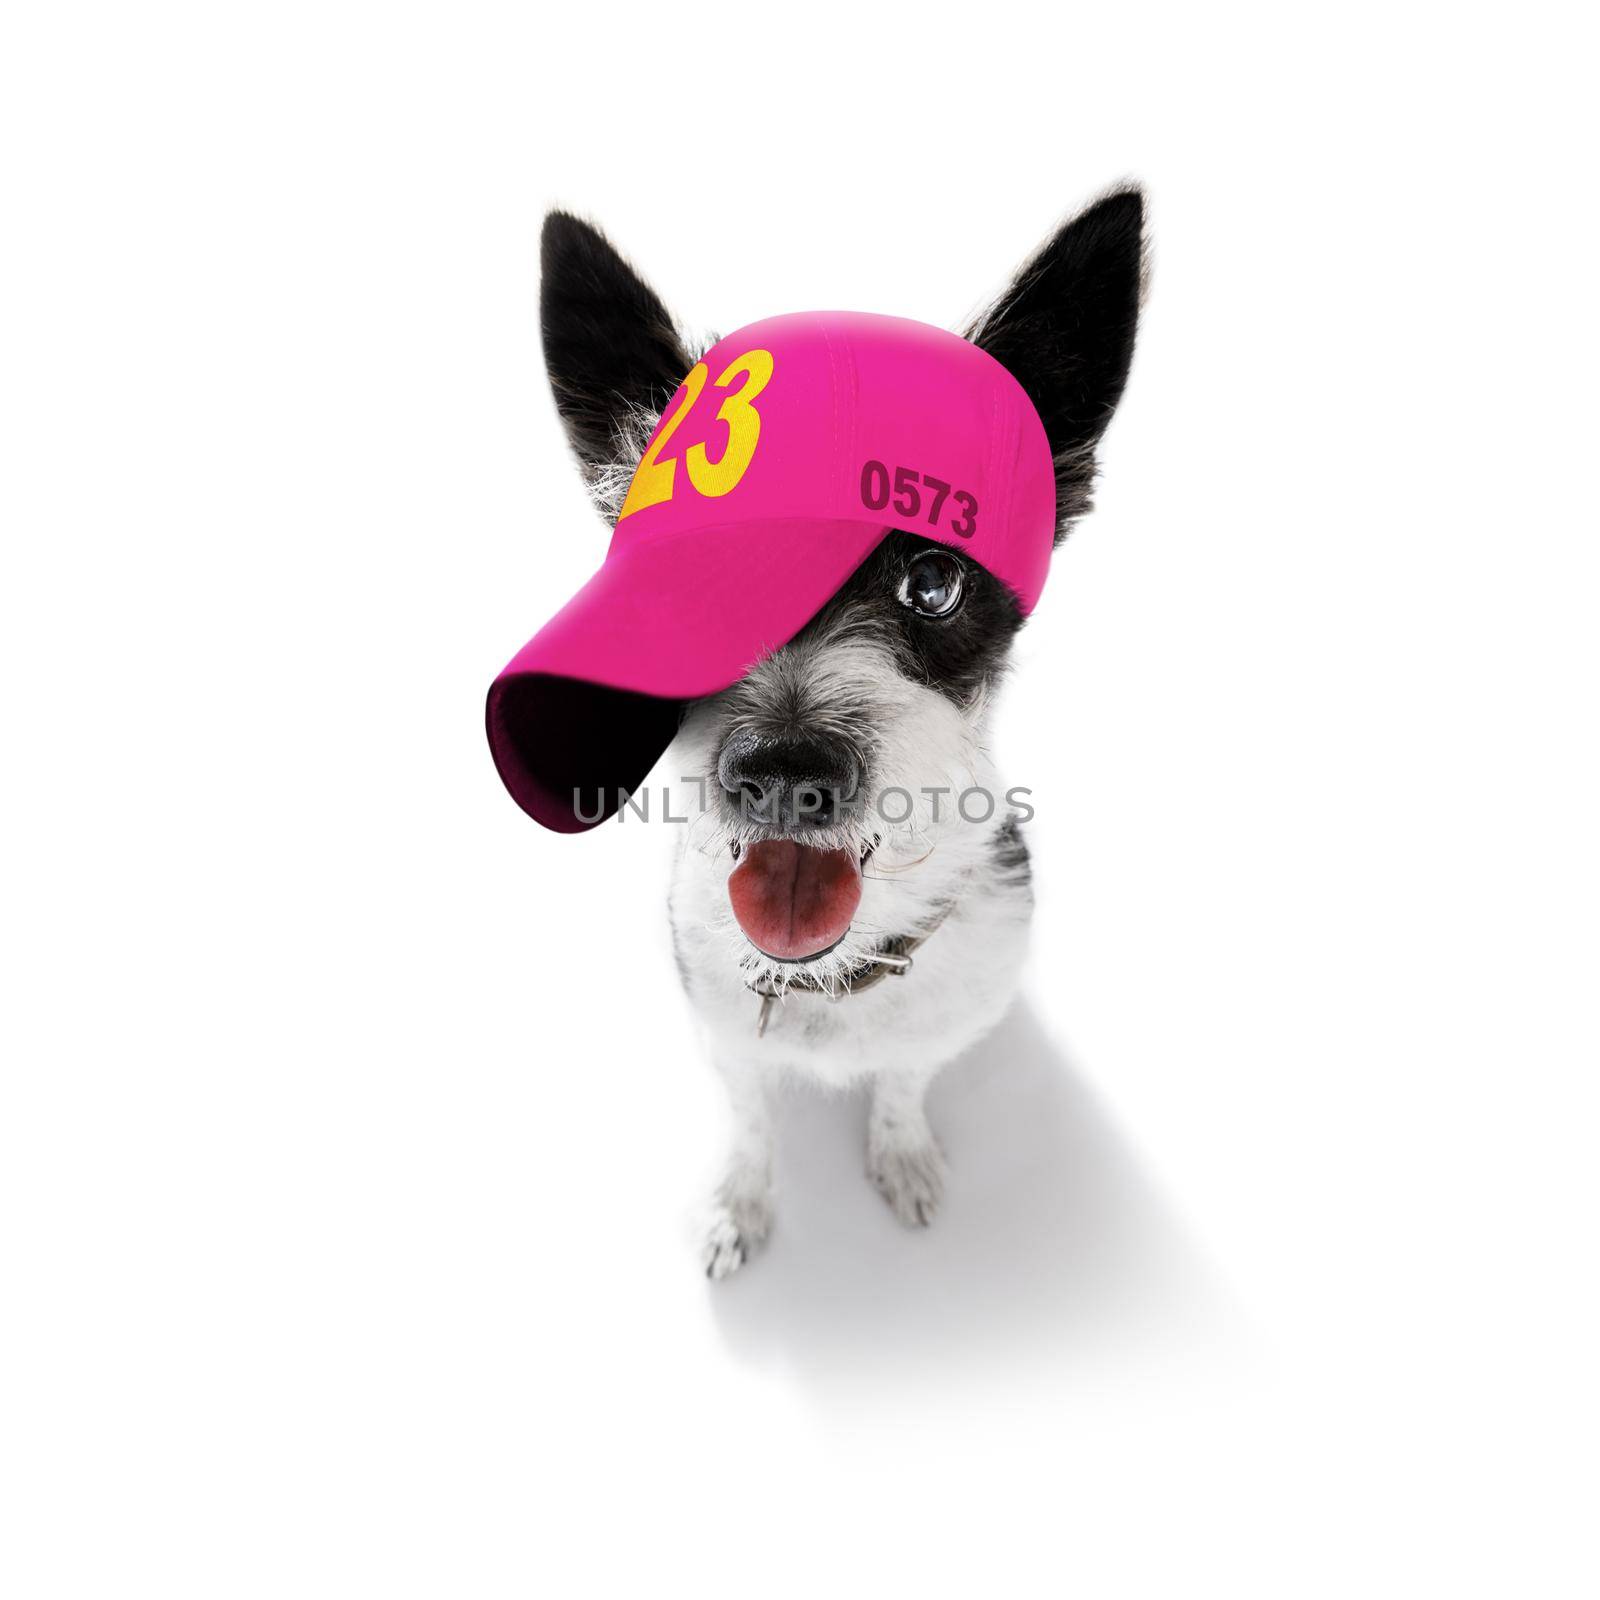 cool casual look poodle dog wearing a baseball cap or hat , sporty and fit , ready for a walk and leash